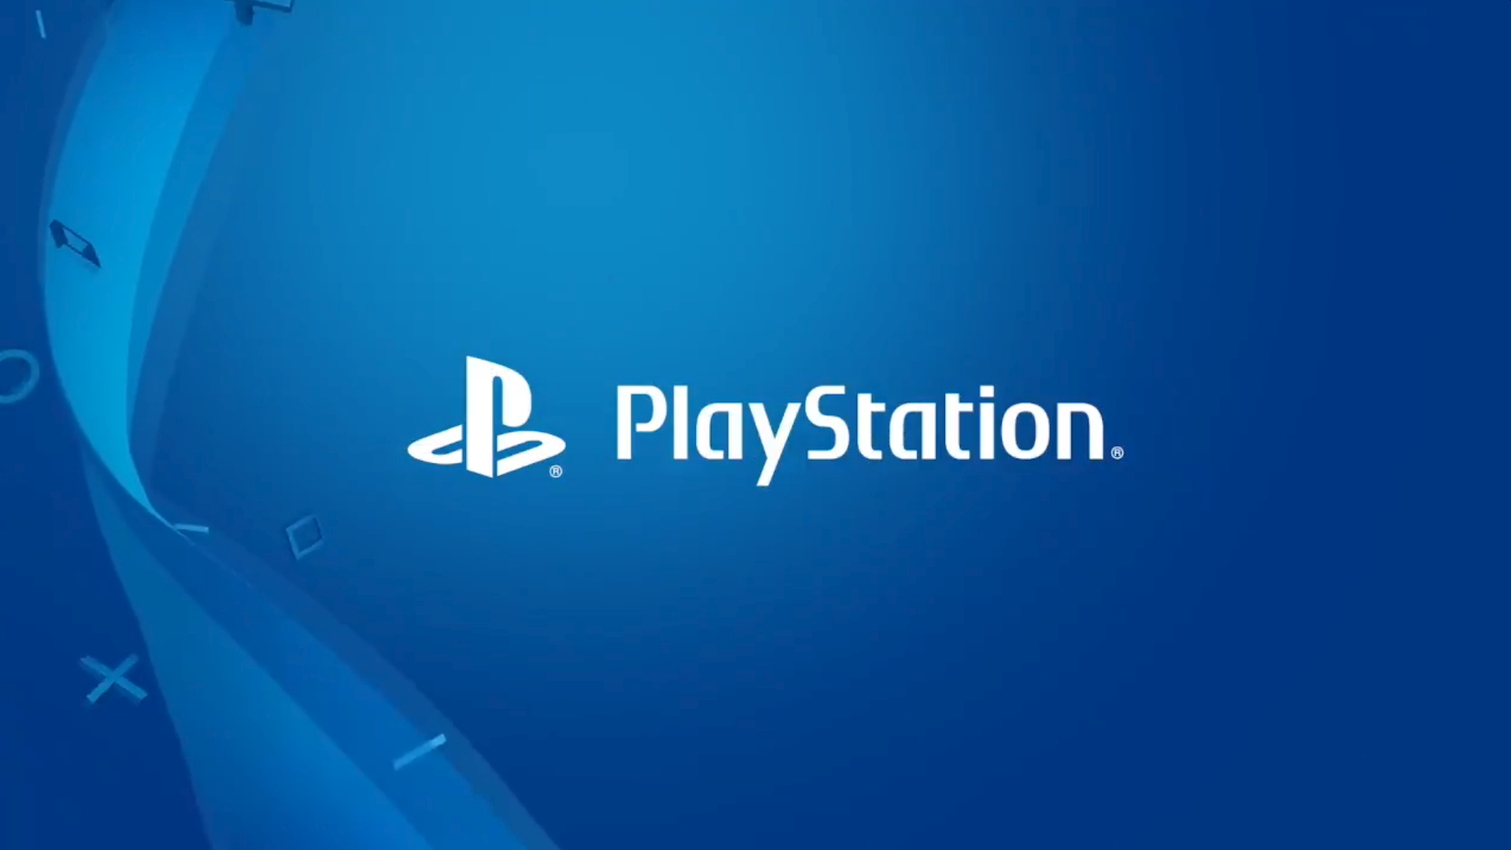 Sony CEO Kenichiro Yoshida States That The Upcoming PlayStation 5 Has 100 Times The Processing Power Of The PlayStation 4